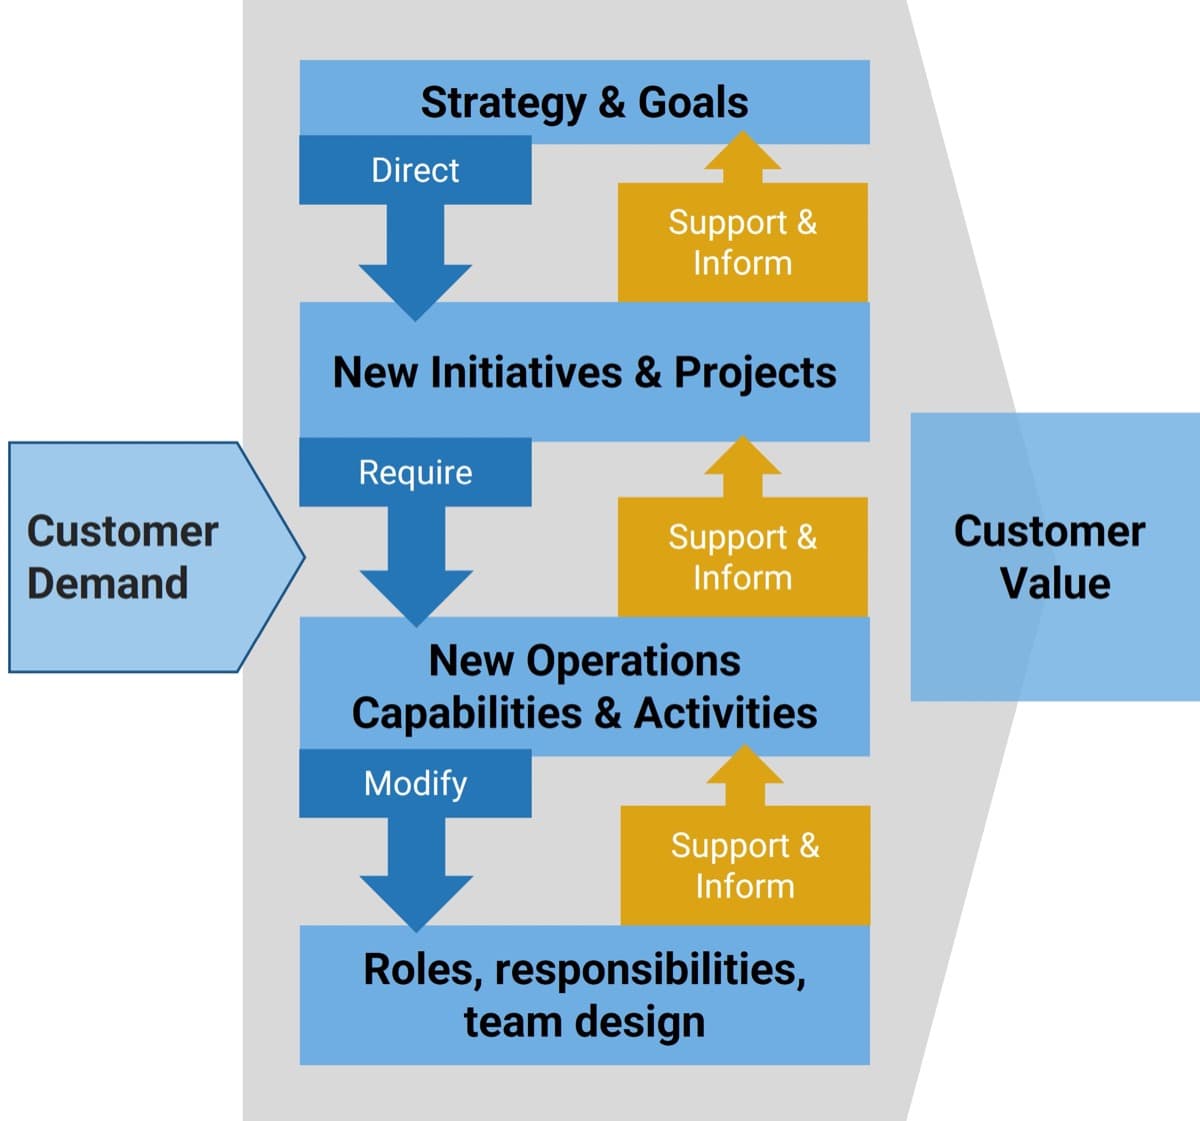 The image contains a screenshot of a diagram to demonstrate how operational design decisions need to be made with customer value in mind.